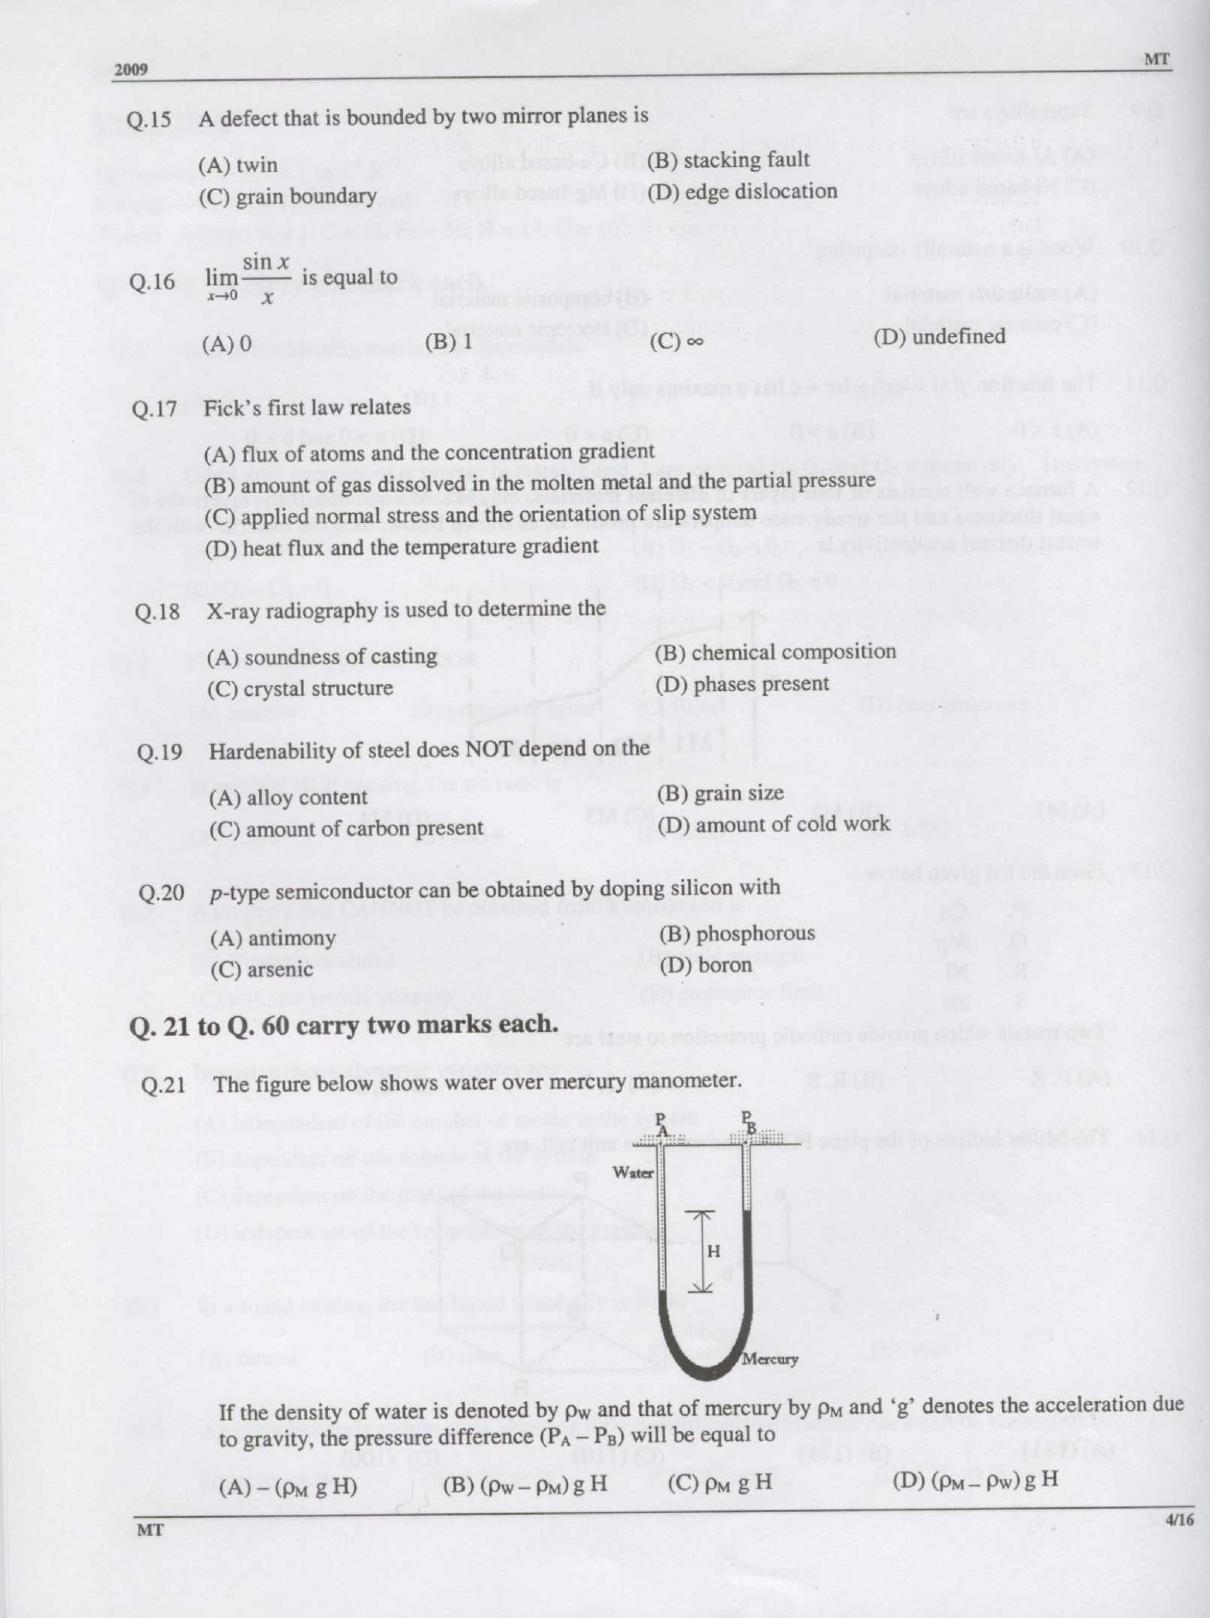 GATE 2009 Metallurgical Engineering (MT) Question Paper with Answer Key - Page 4